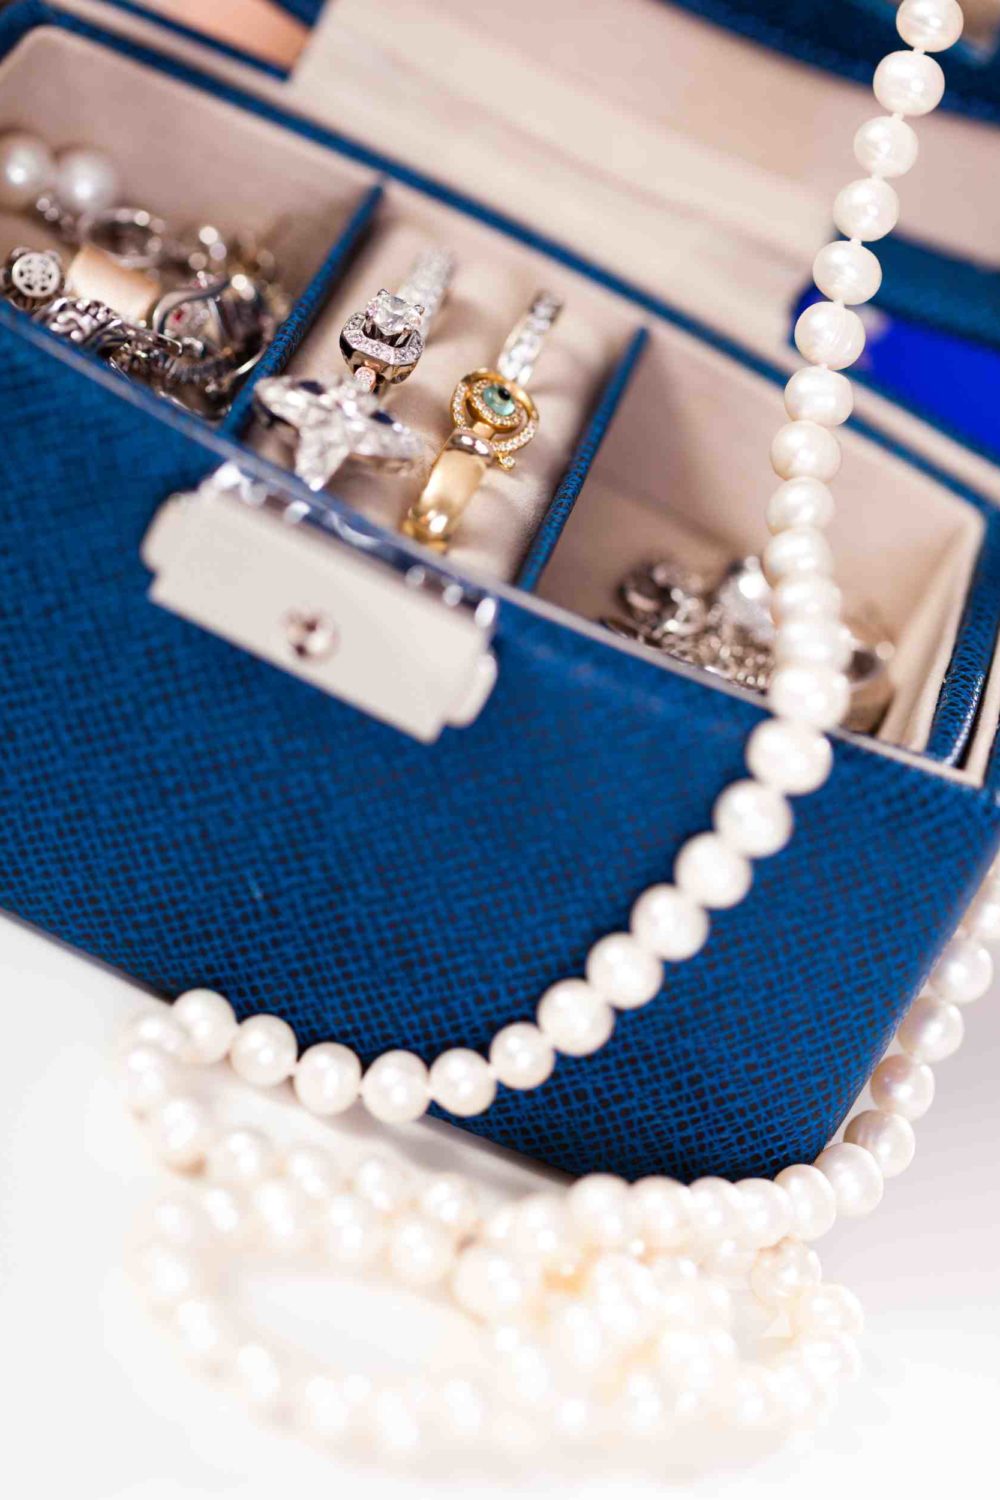 How to Curate Your Jewelry Box